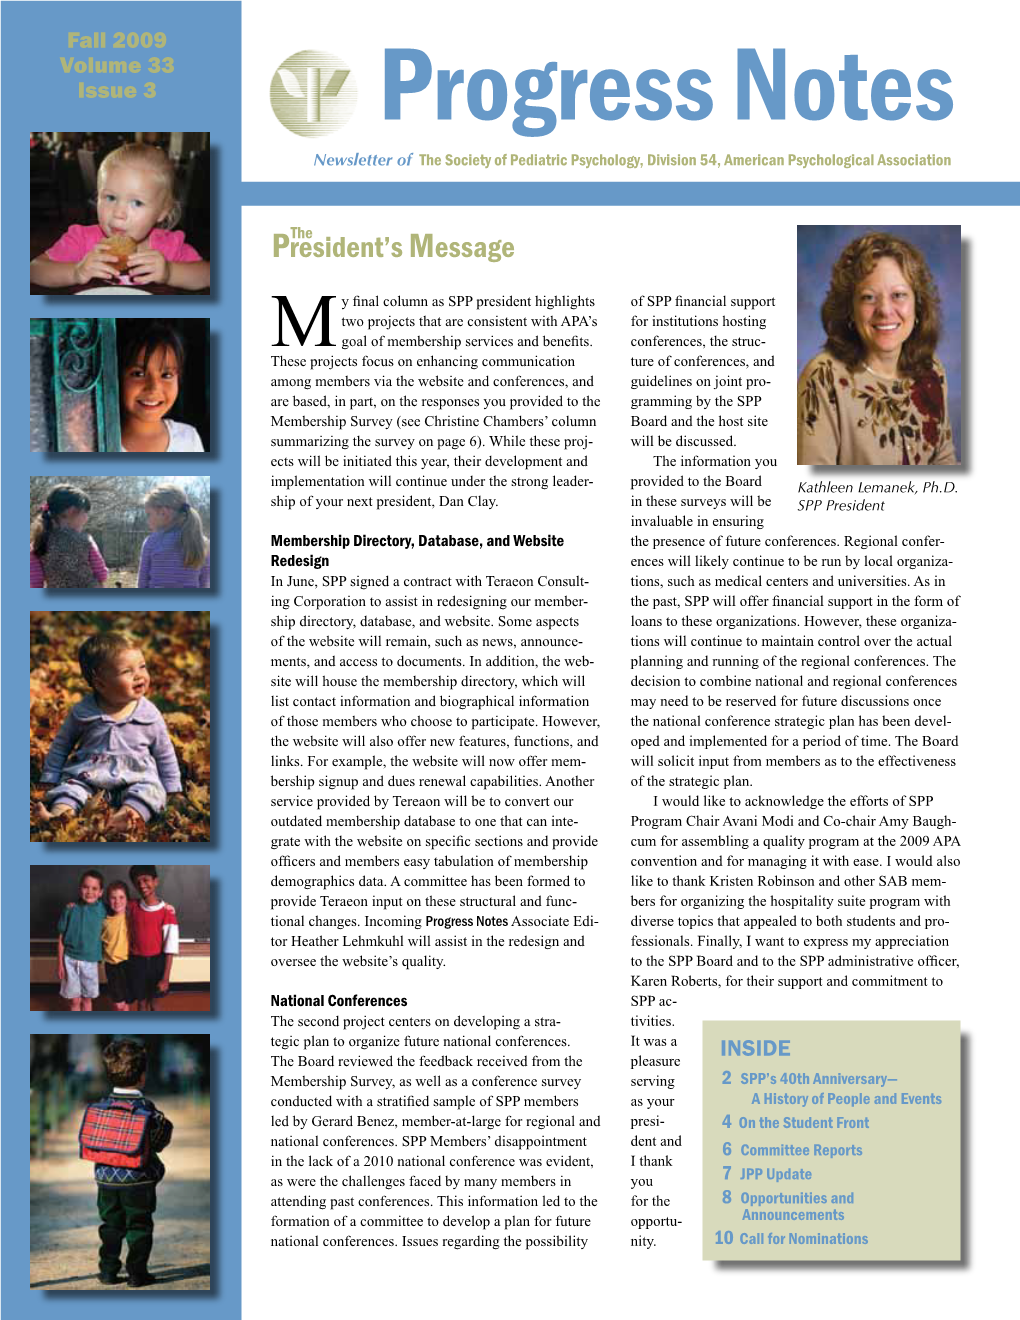 Fall 2009 Volume 33 Issue 3 Progress Notes Newsletter of the Society of Pediatric Psychology, Division 54, American Psychological Association